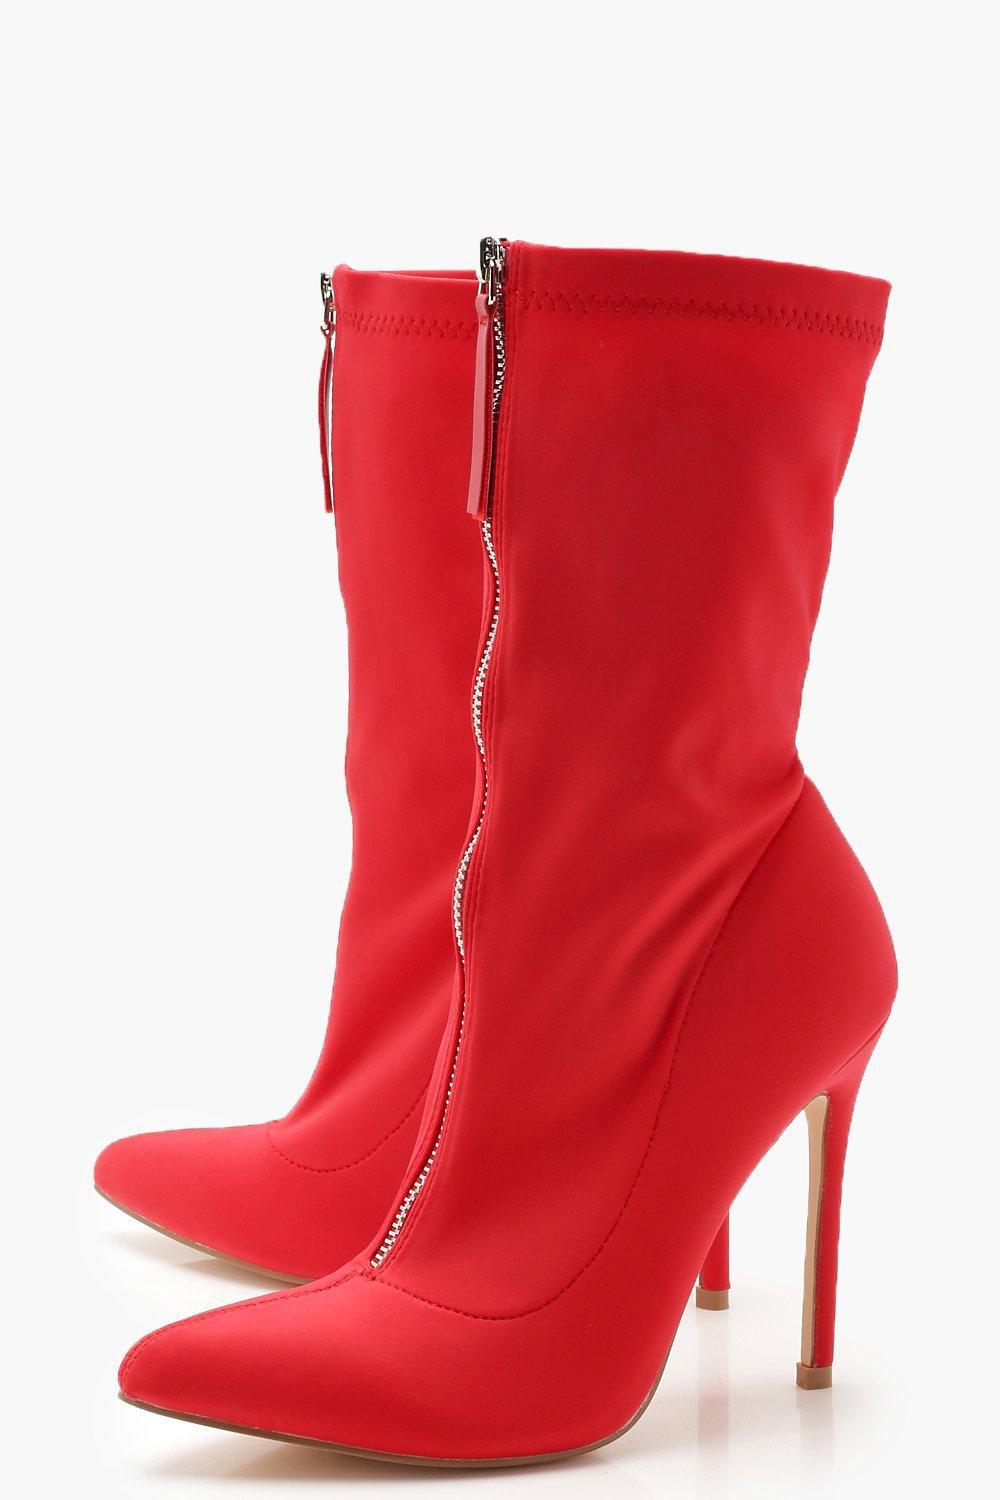 boohoo red boots